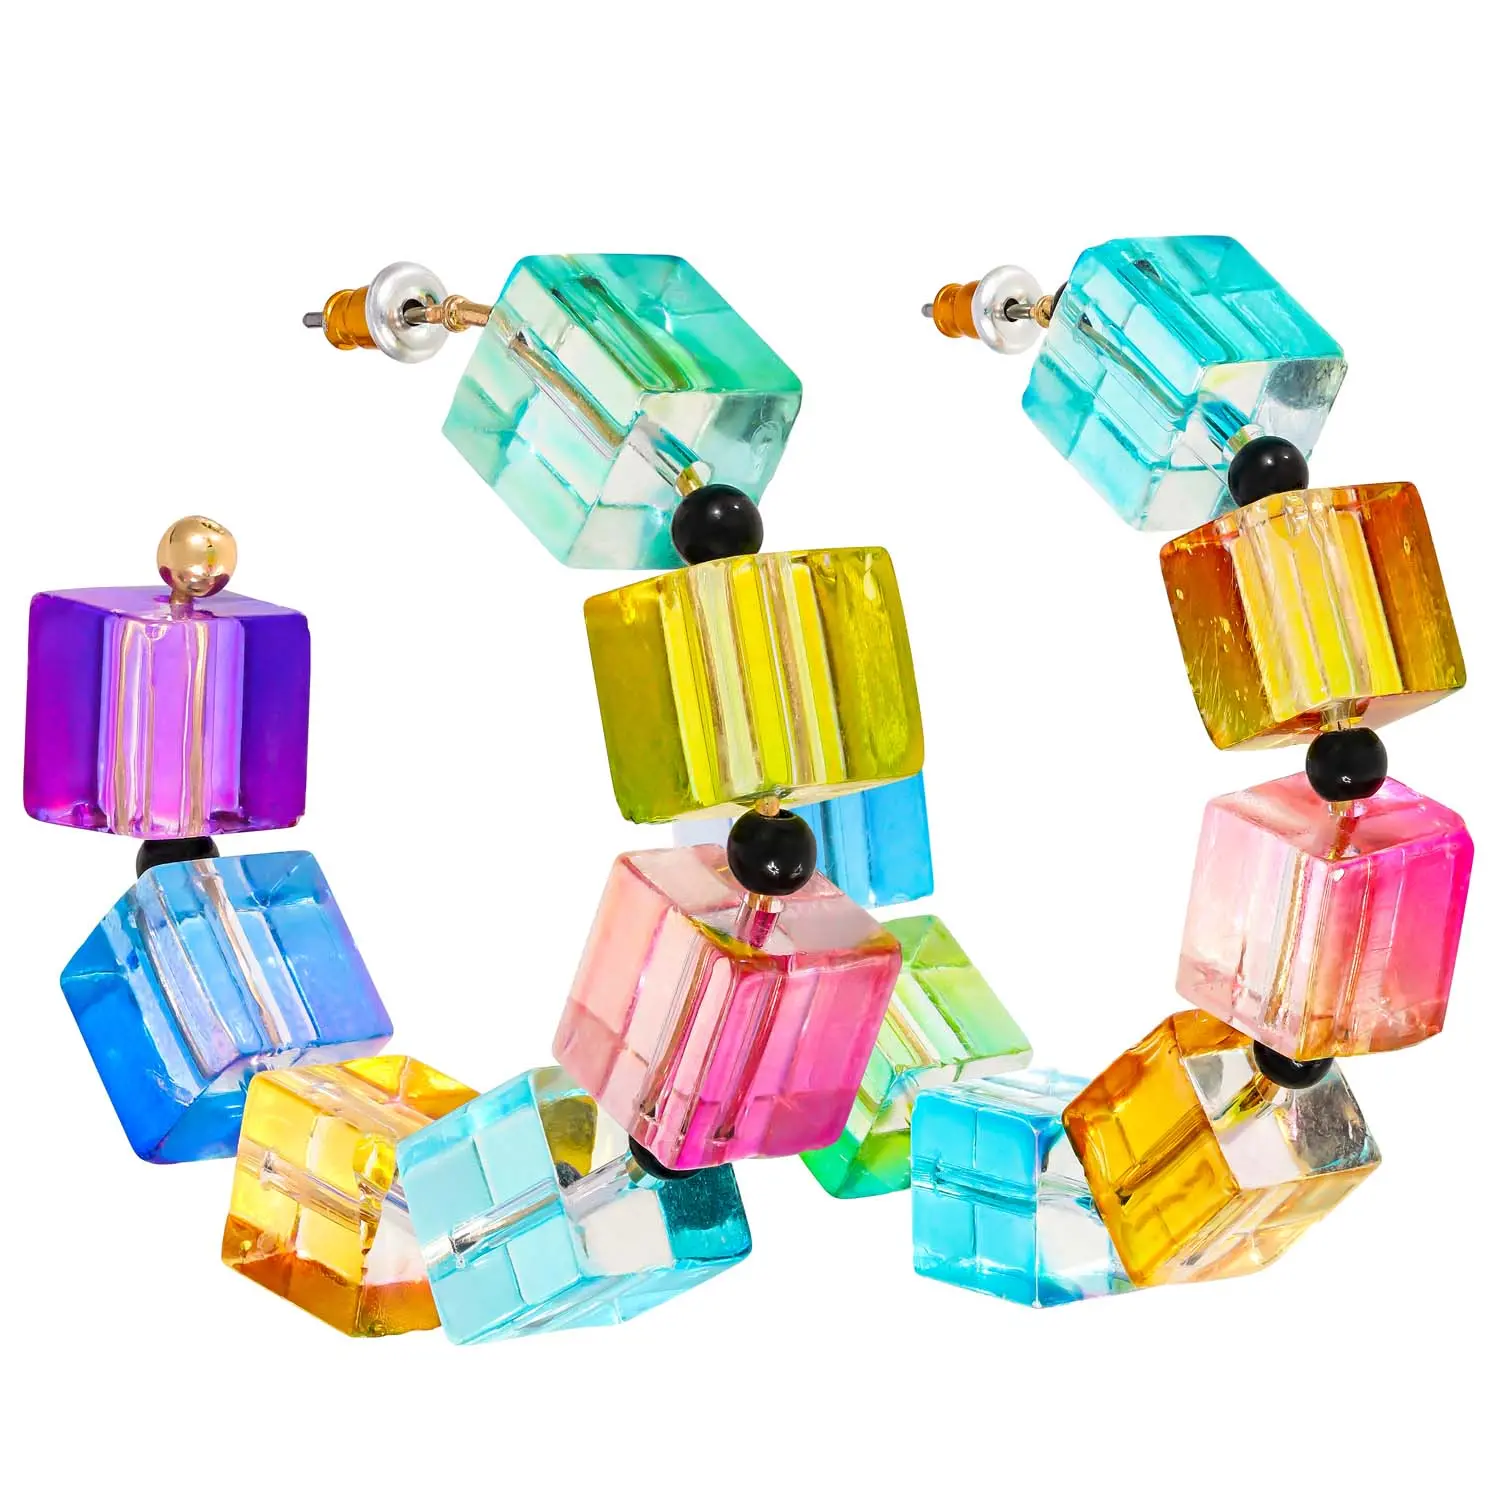 Aros - Colorful Cubes